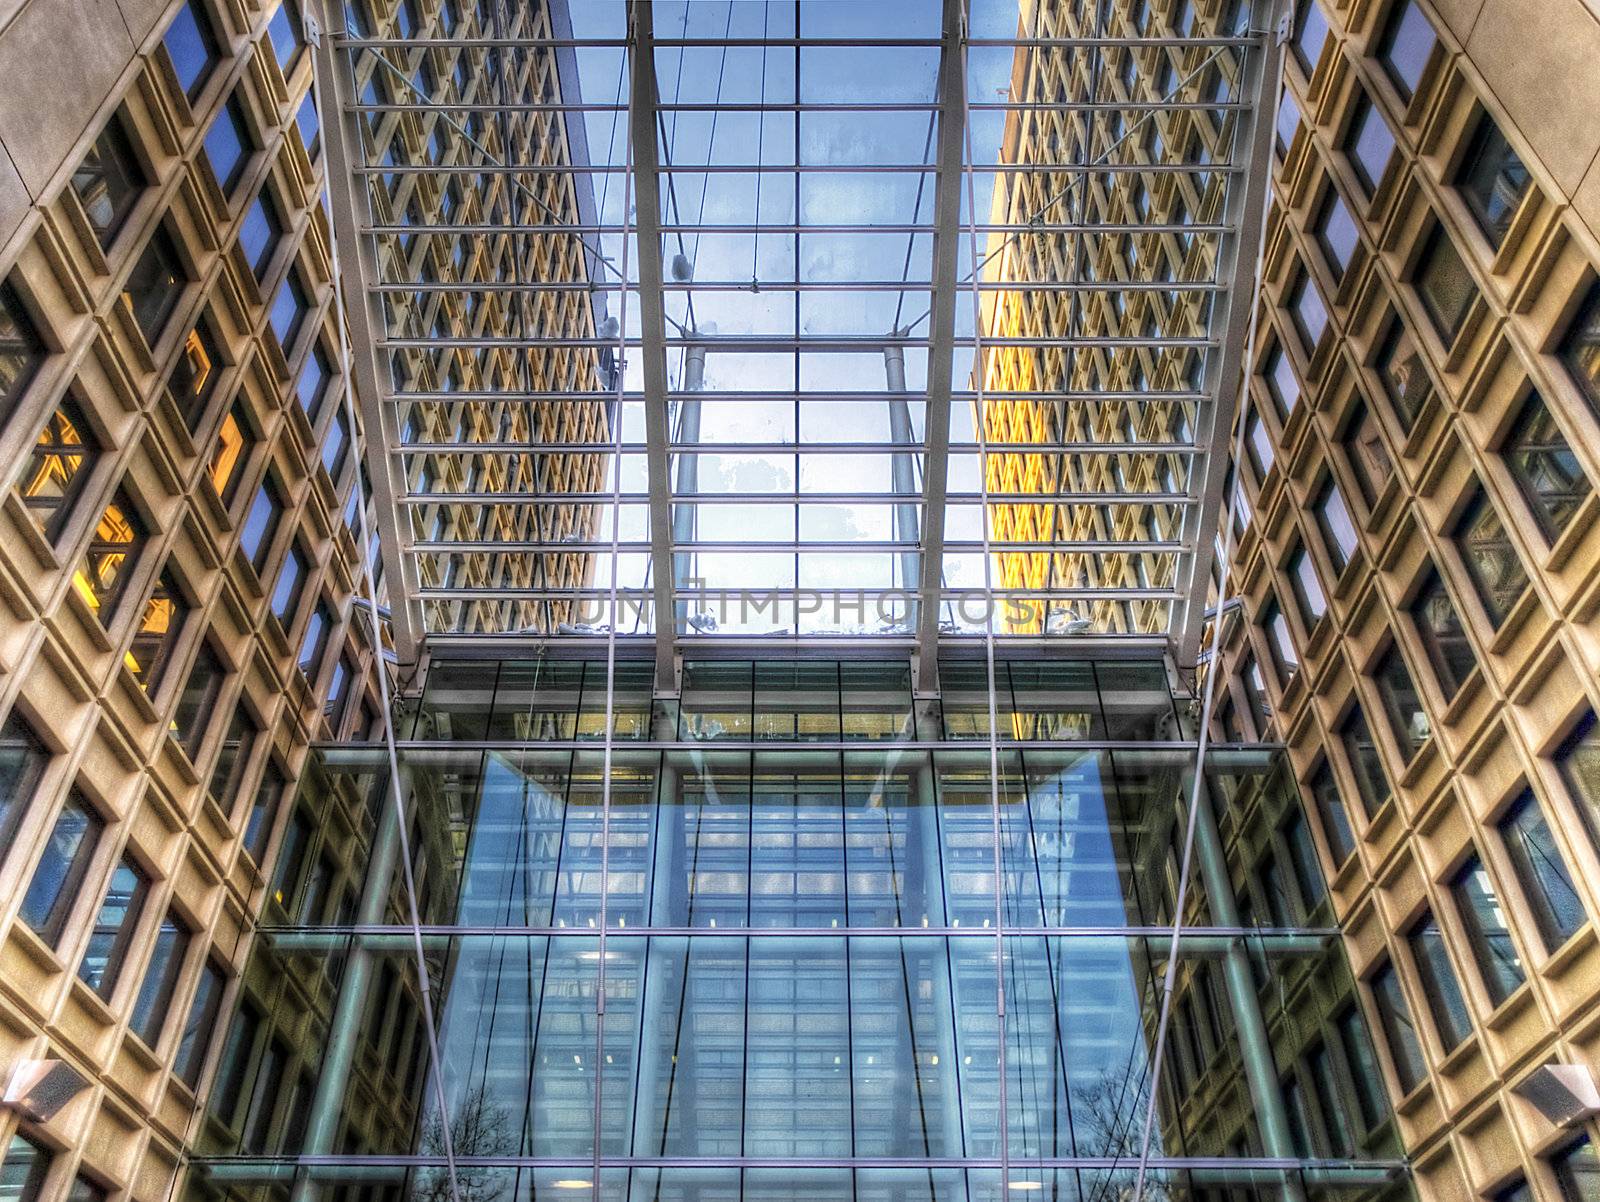 A new addition to the Capital Health building. A grid like structure of glass and steel.